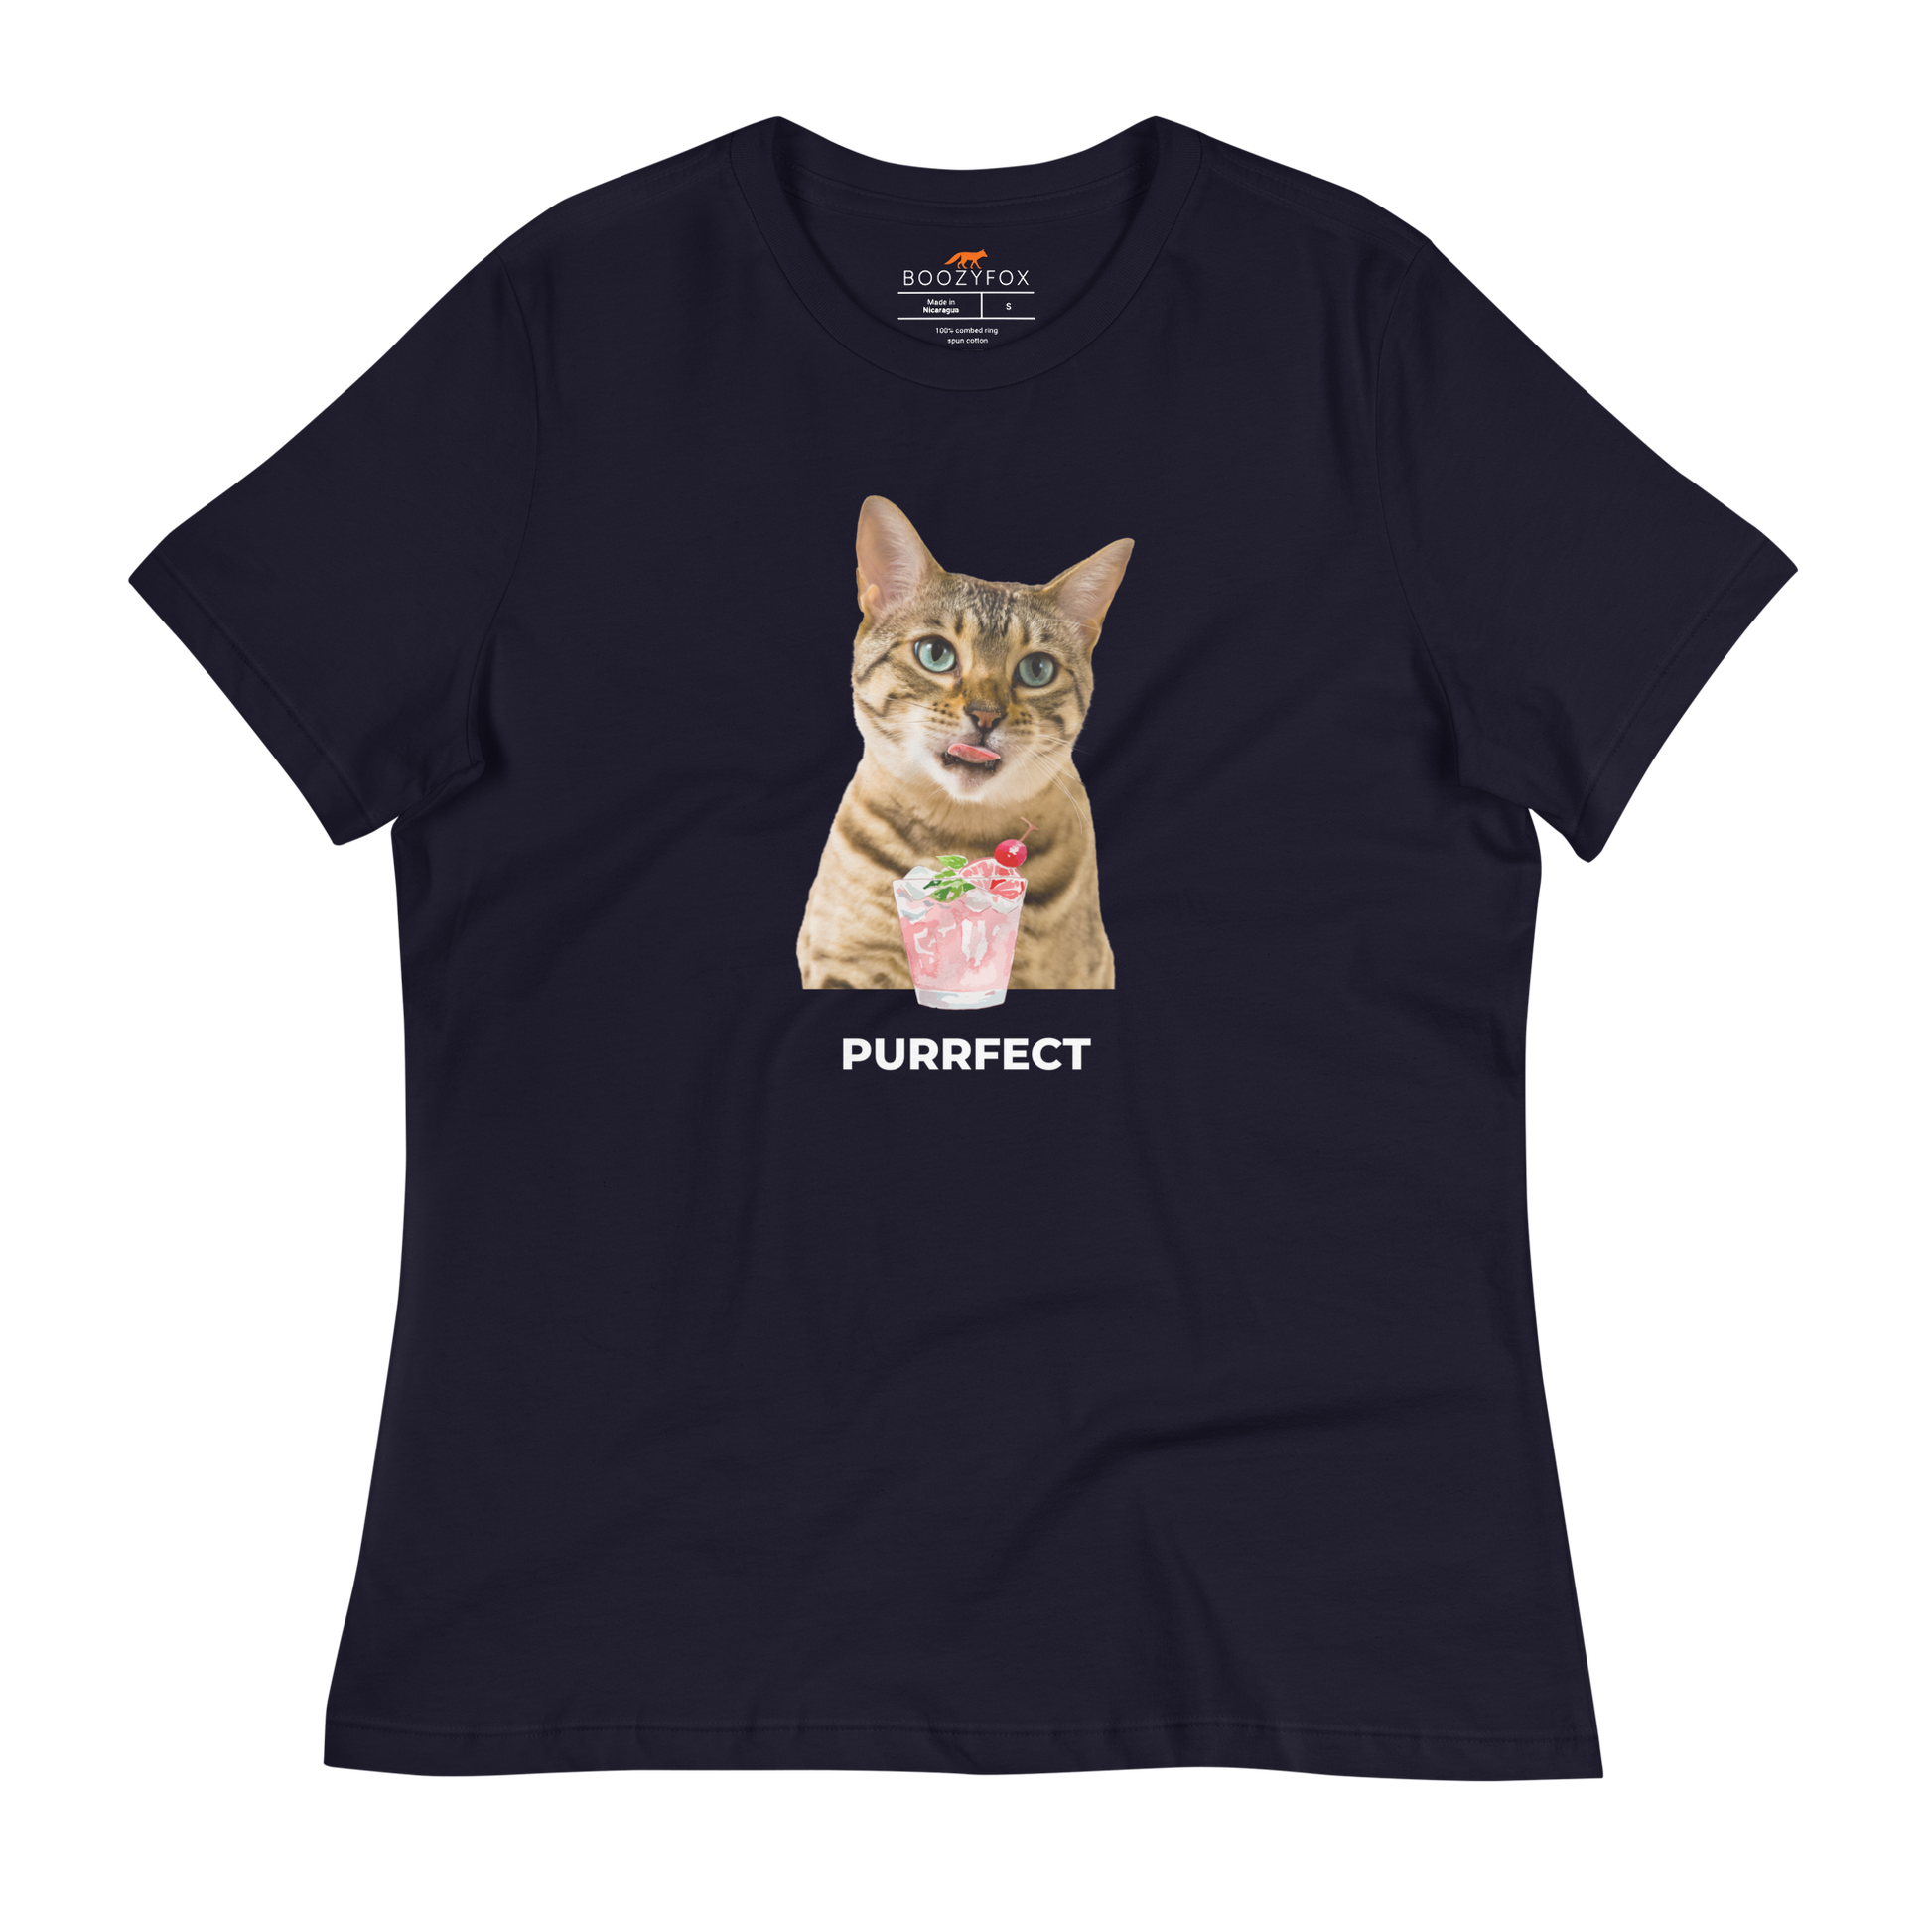 Women's relaxed navy cat t-shirt featuring a hilarious Purrfect graphic on the chest - Women's Funny Graphic Cat Tees - Boozy Fox